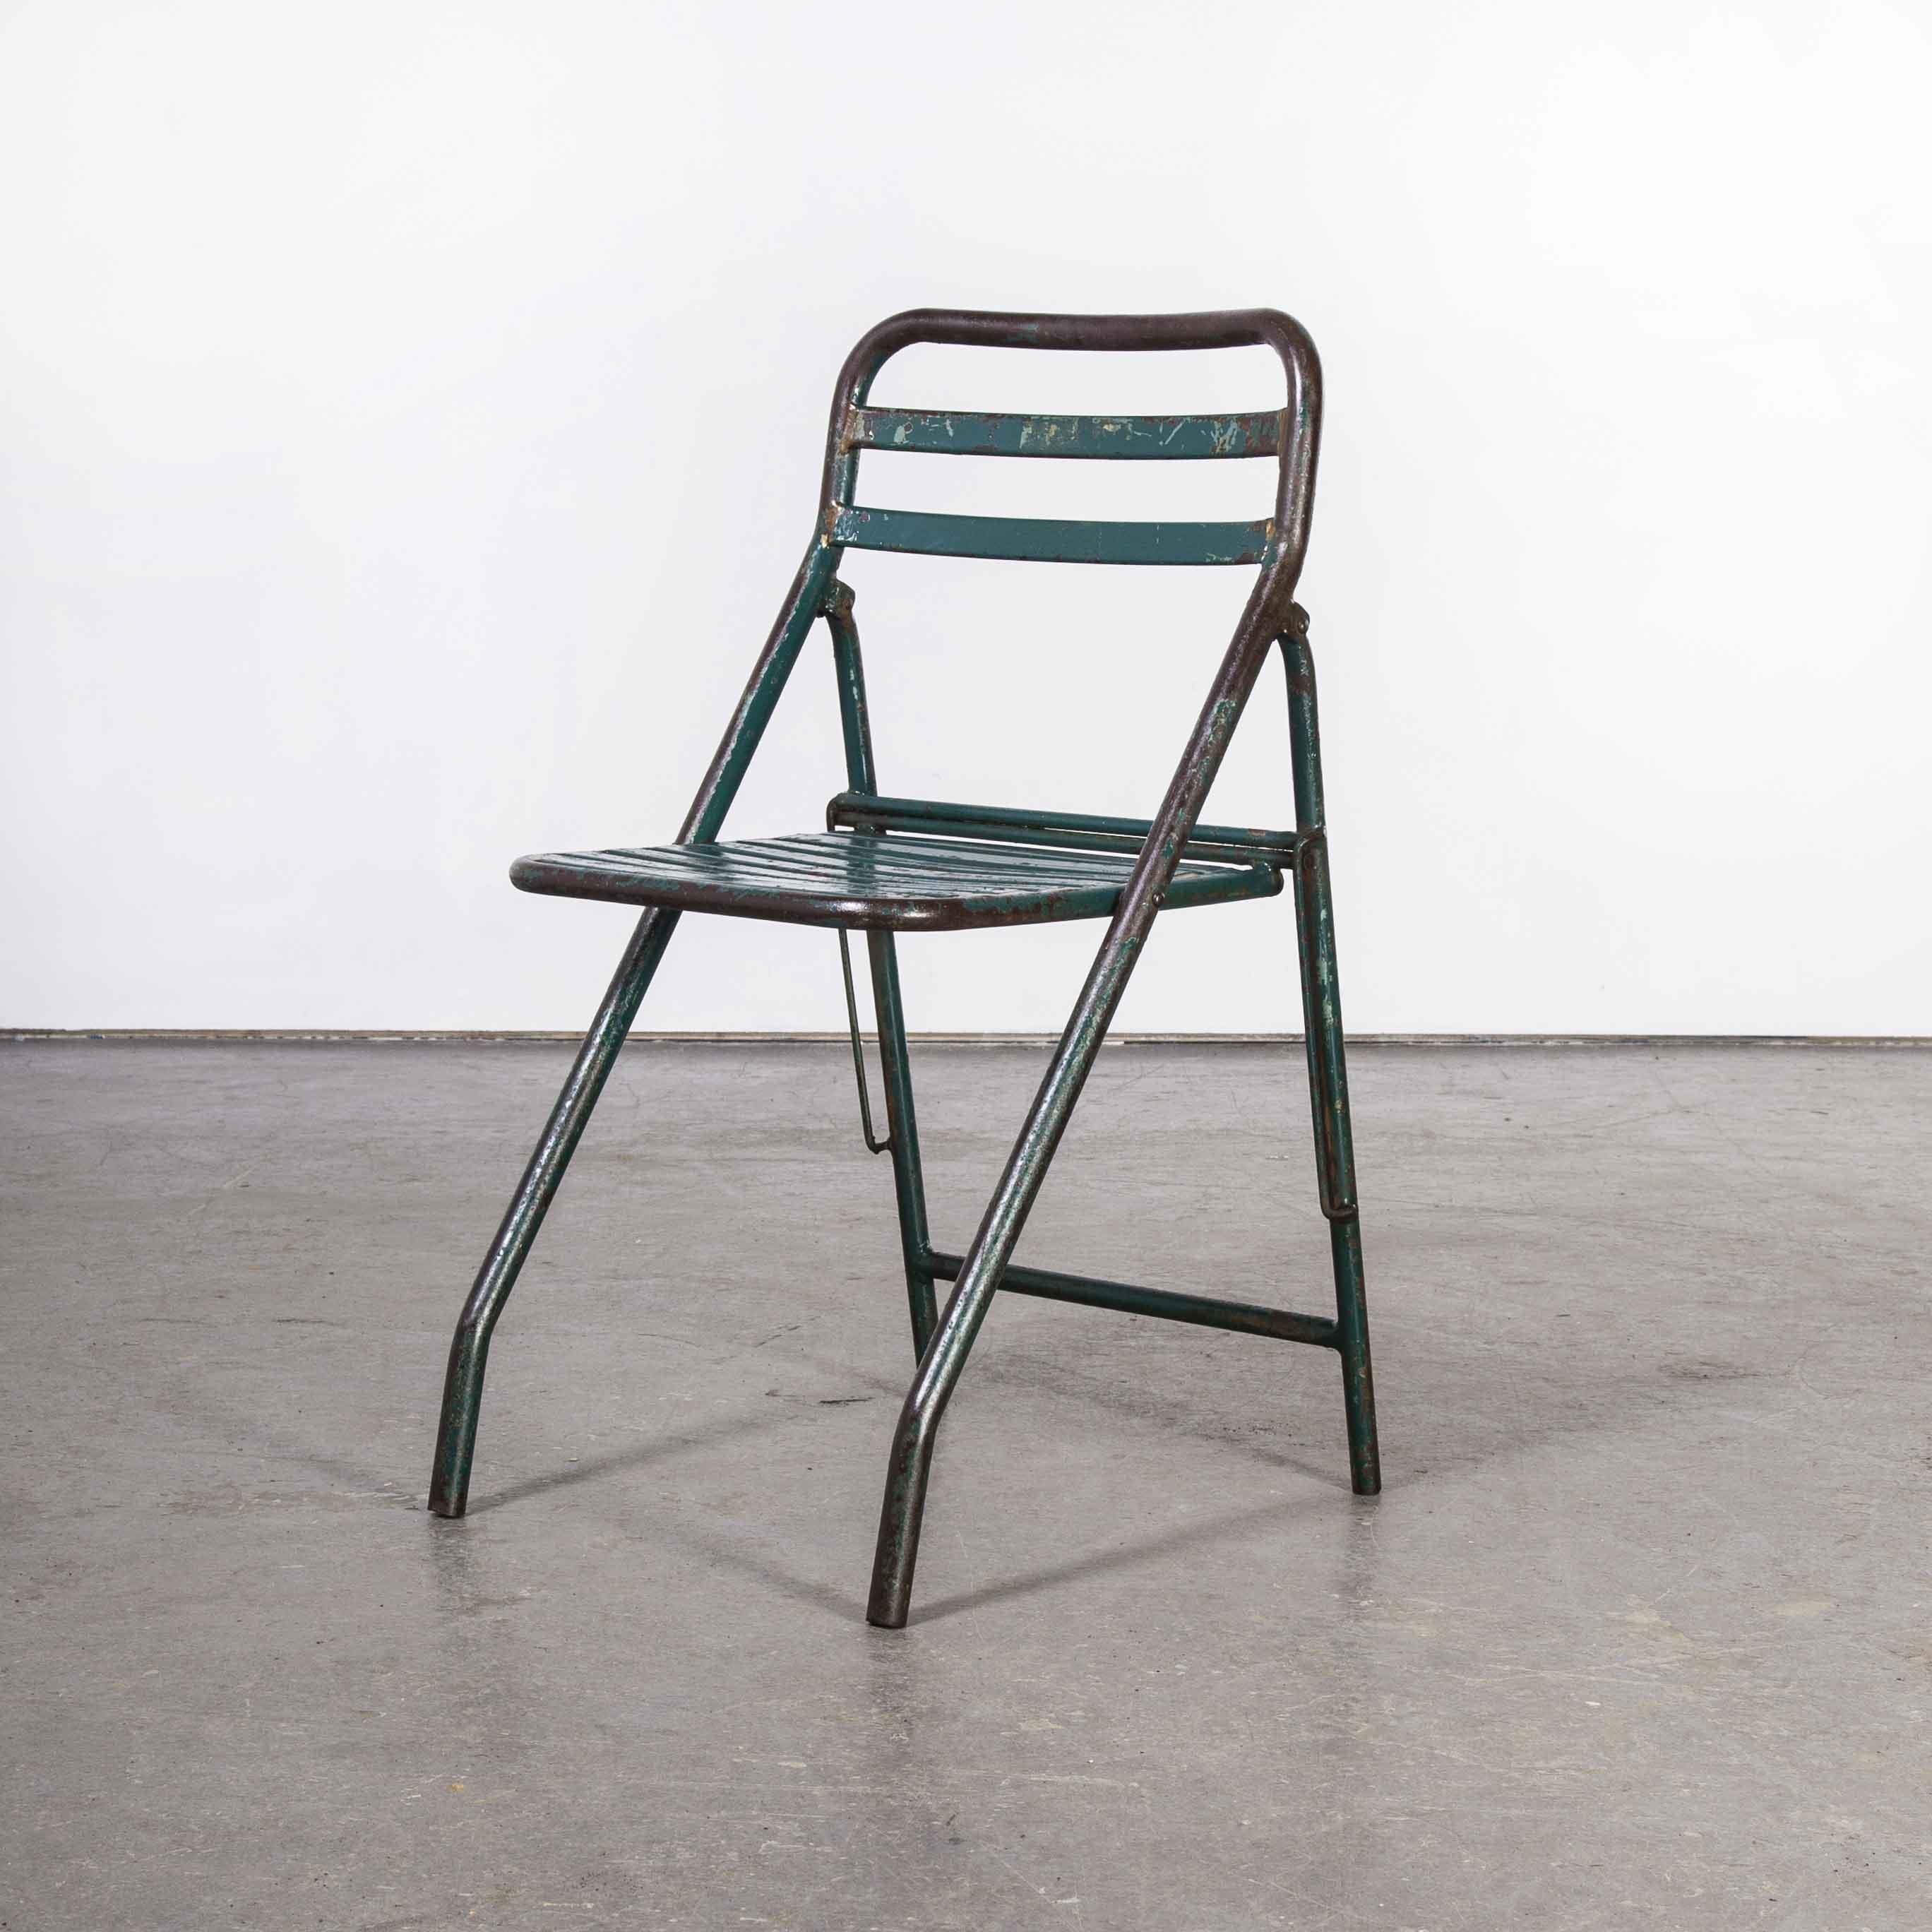 Mid-20th Century 1960's, French Army Green Metal Folding Chairs, Various Quantities Available